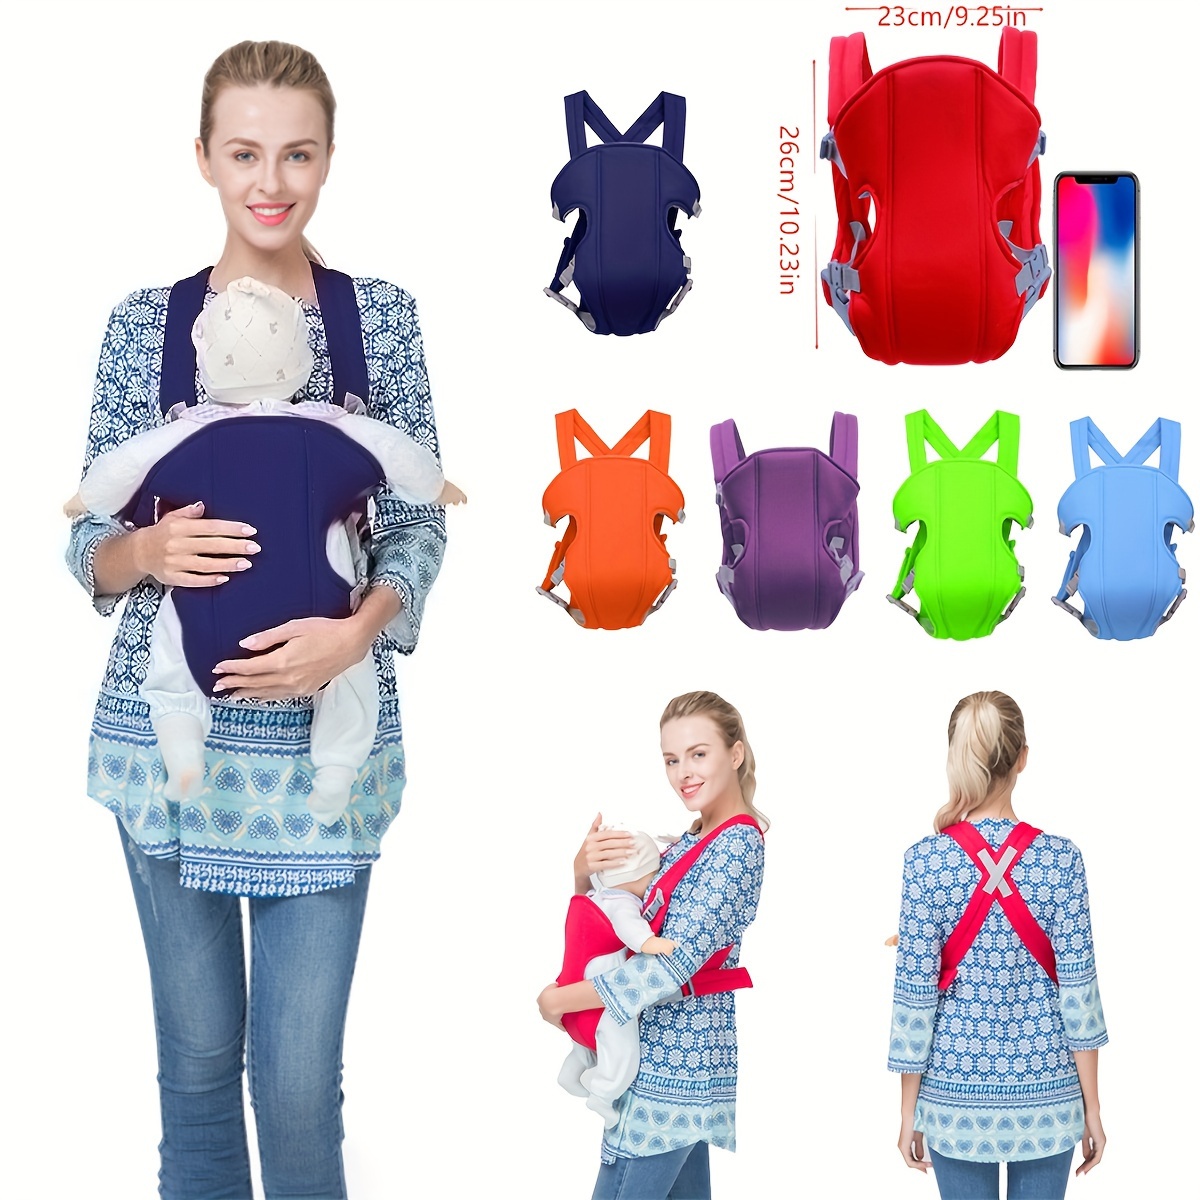 Baby Soft Carrier for Newborn,Infant Sling Carrier Wrap Ergonomic Design 4  in 1 Infants Carriers Front and Back,Multi-Functional Hug Strap for  7-45lbs(3-48 Months)Newborns and Baby-Grey